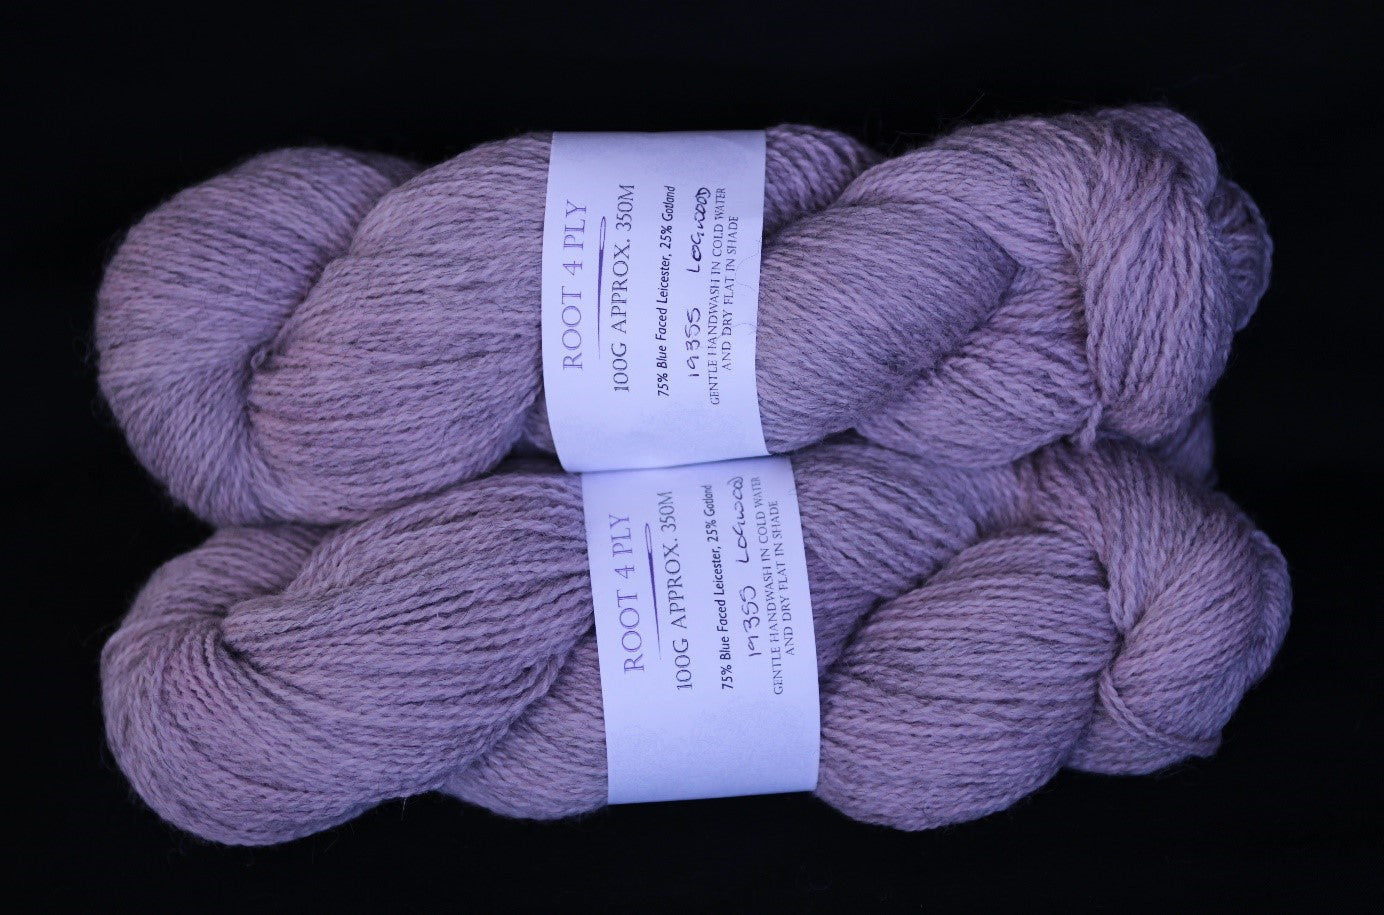 Heather four ply Blue Faced Leicester/Gotland